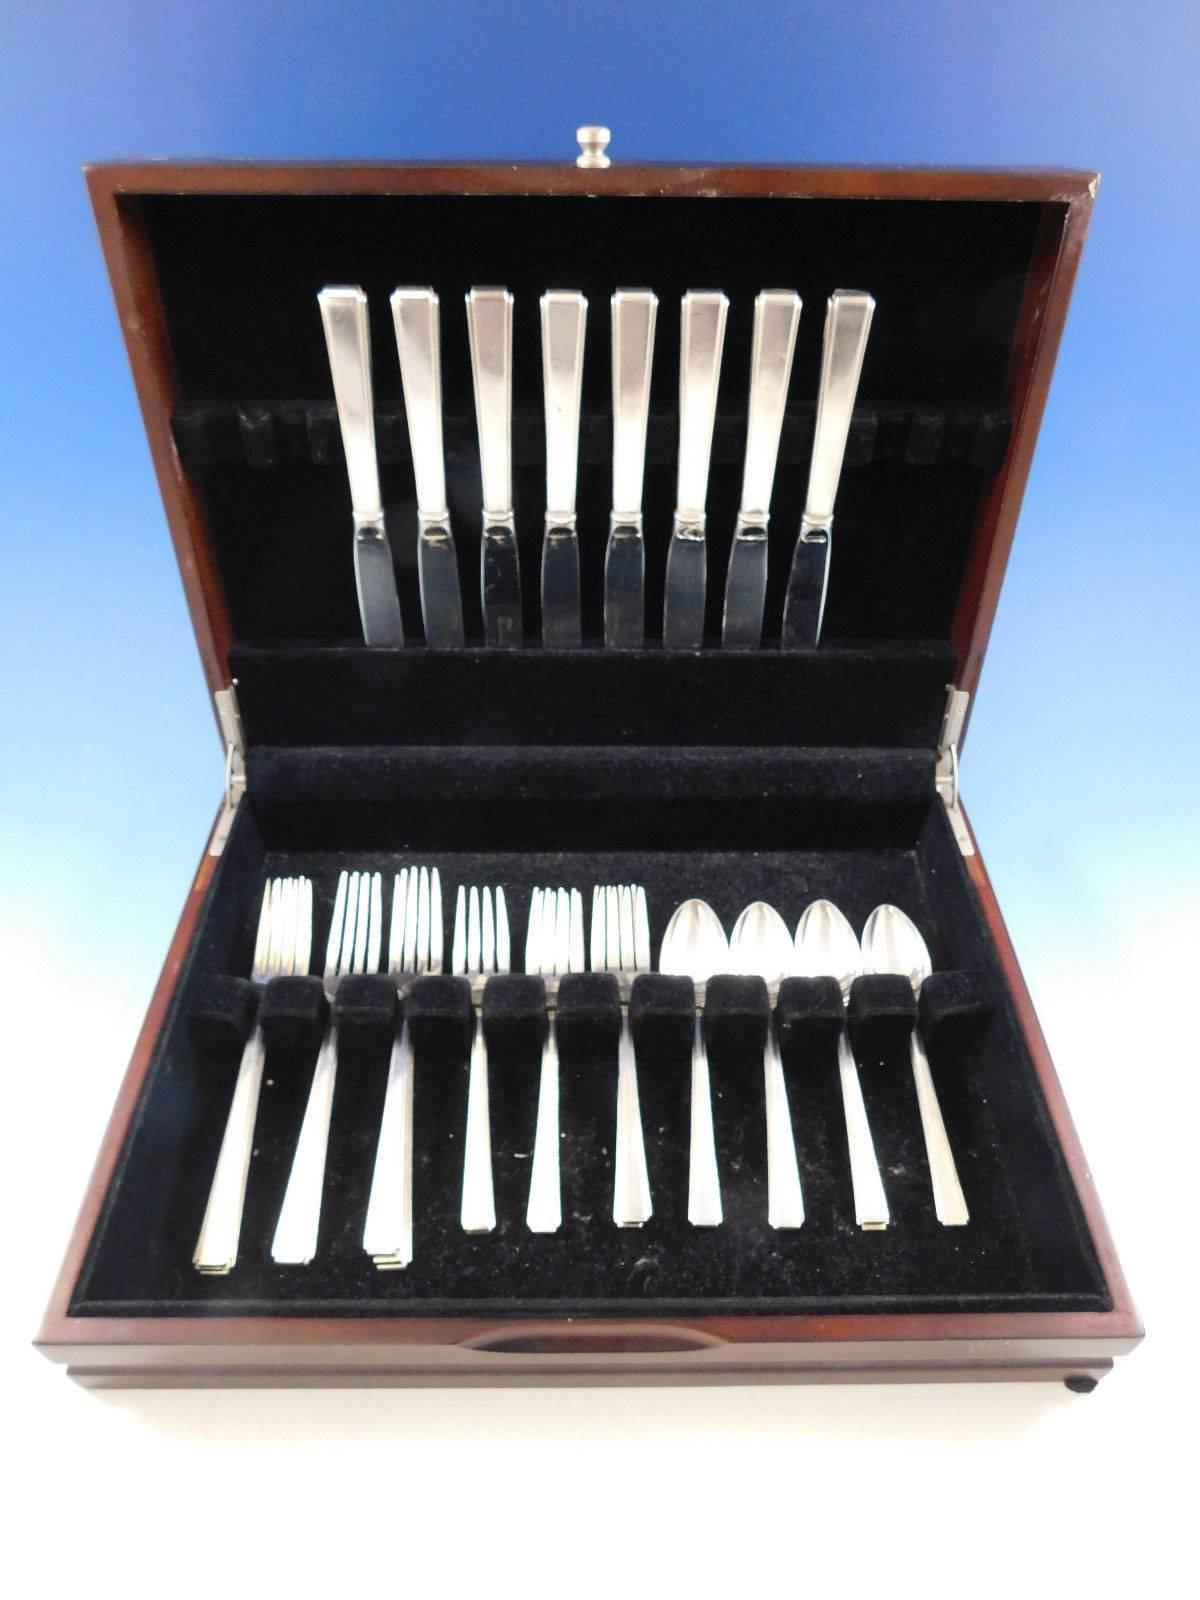 Timeless Modern Classic by Lunt sterling silver flatware set, 32 pieces. This set includes: 

eight knives, 8 1/2